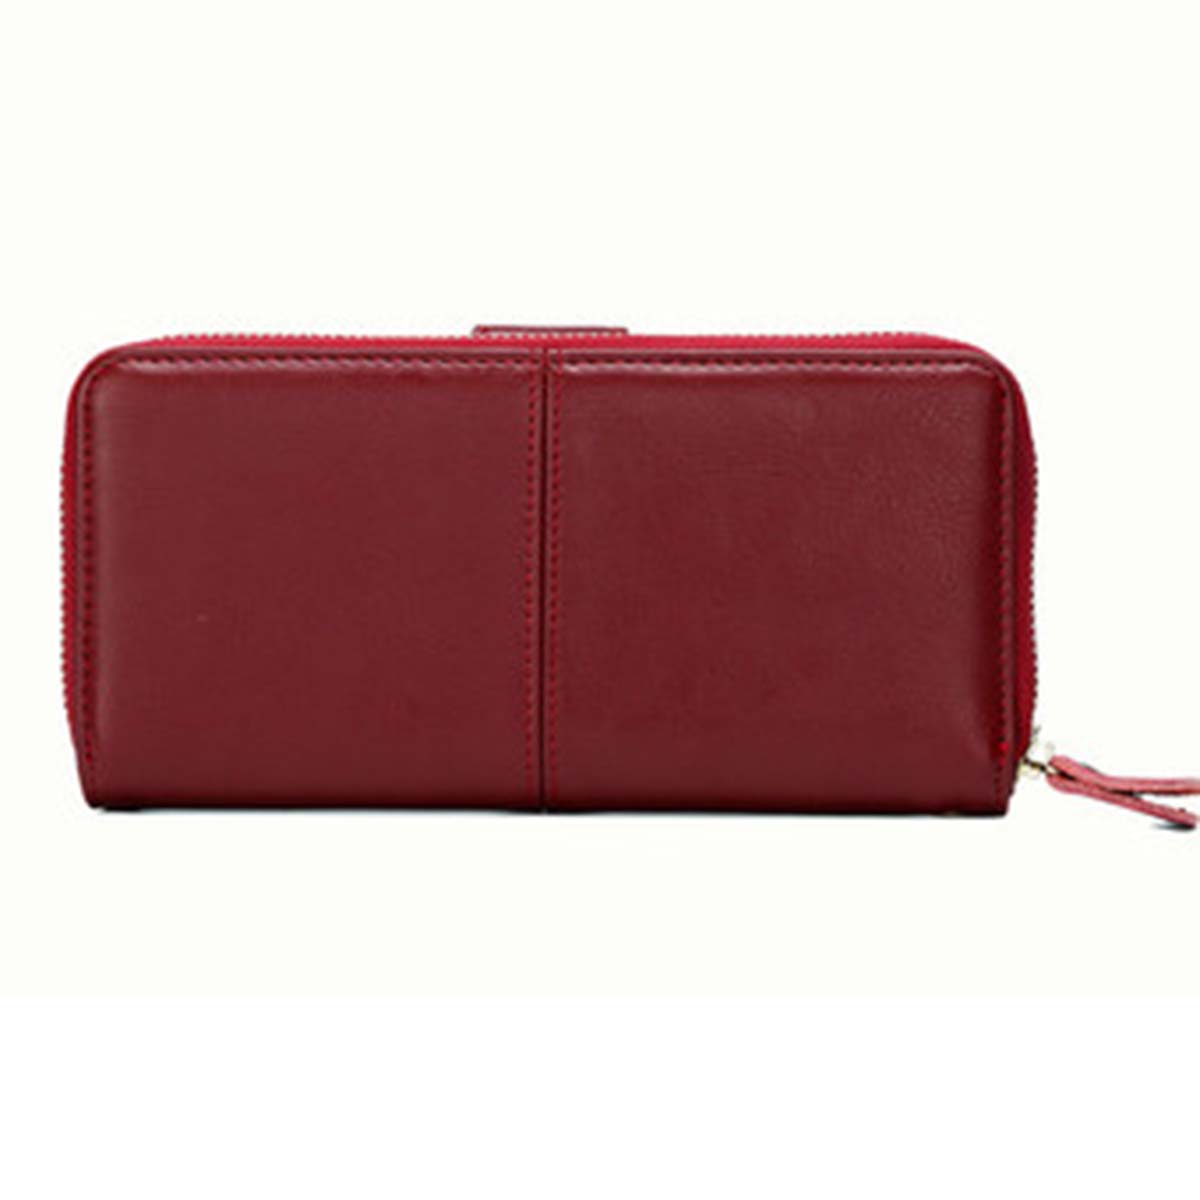 Women top grain genuine cow leather wallet real leather long model red intl 2866 5220706 2 product